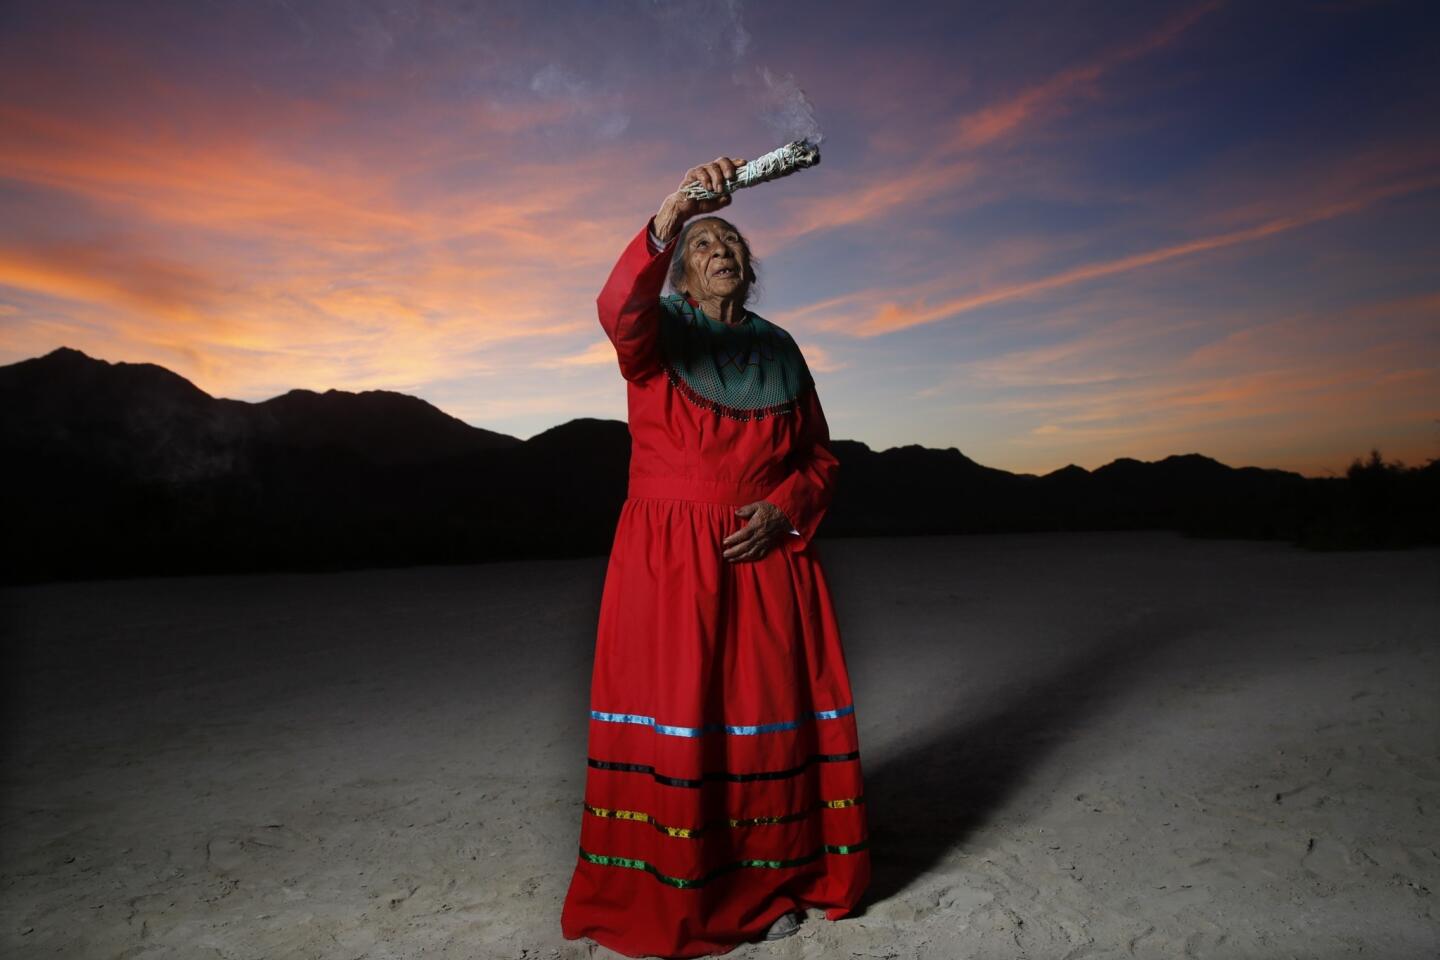 Inocencia Gonzalez Saiz waves burning sage over a dry marsh that she says was a wetland teeming with fish when she was growing up here in the Colorado River delta. The 77-year-old elder holds little hope that her ceremony will restore the lush ecosystem where her people, the indigenous Cucapa, live. And a release of water into the Colorado River is not expected to reach their land. The name Cucapa, she says, means "people of the river."